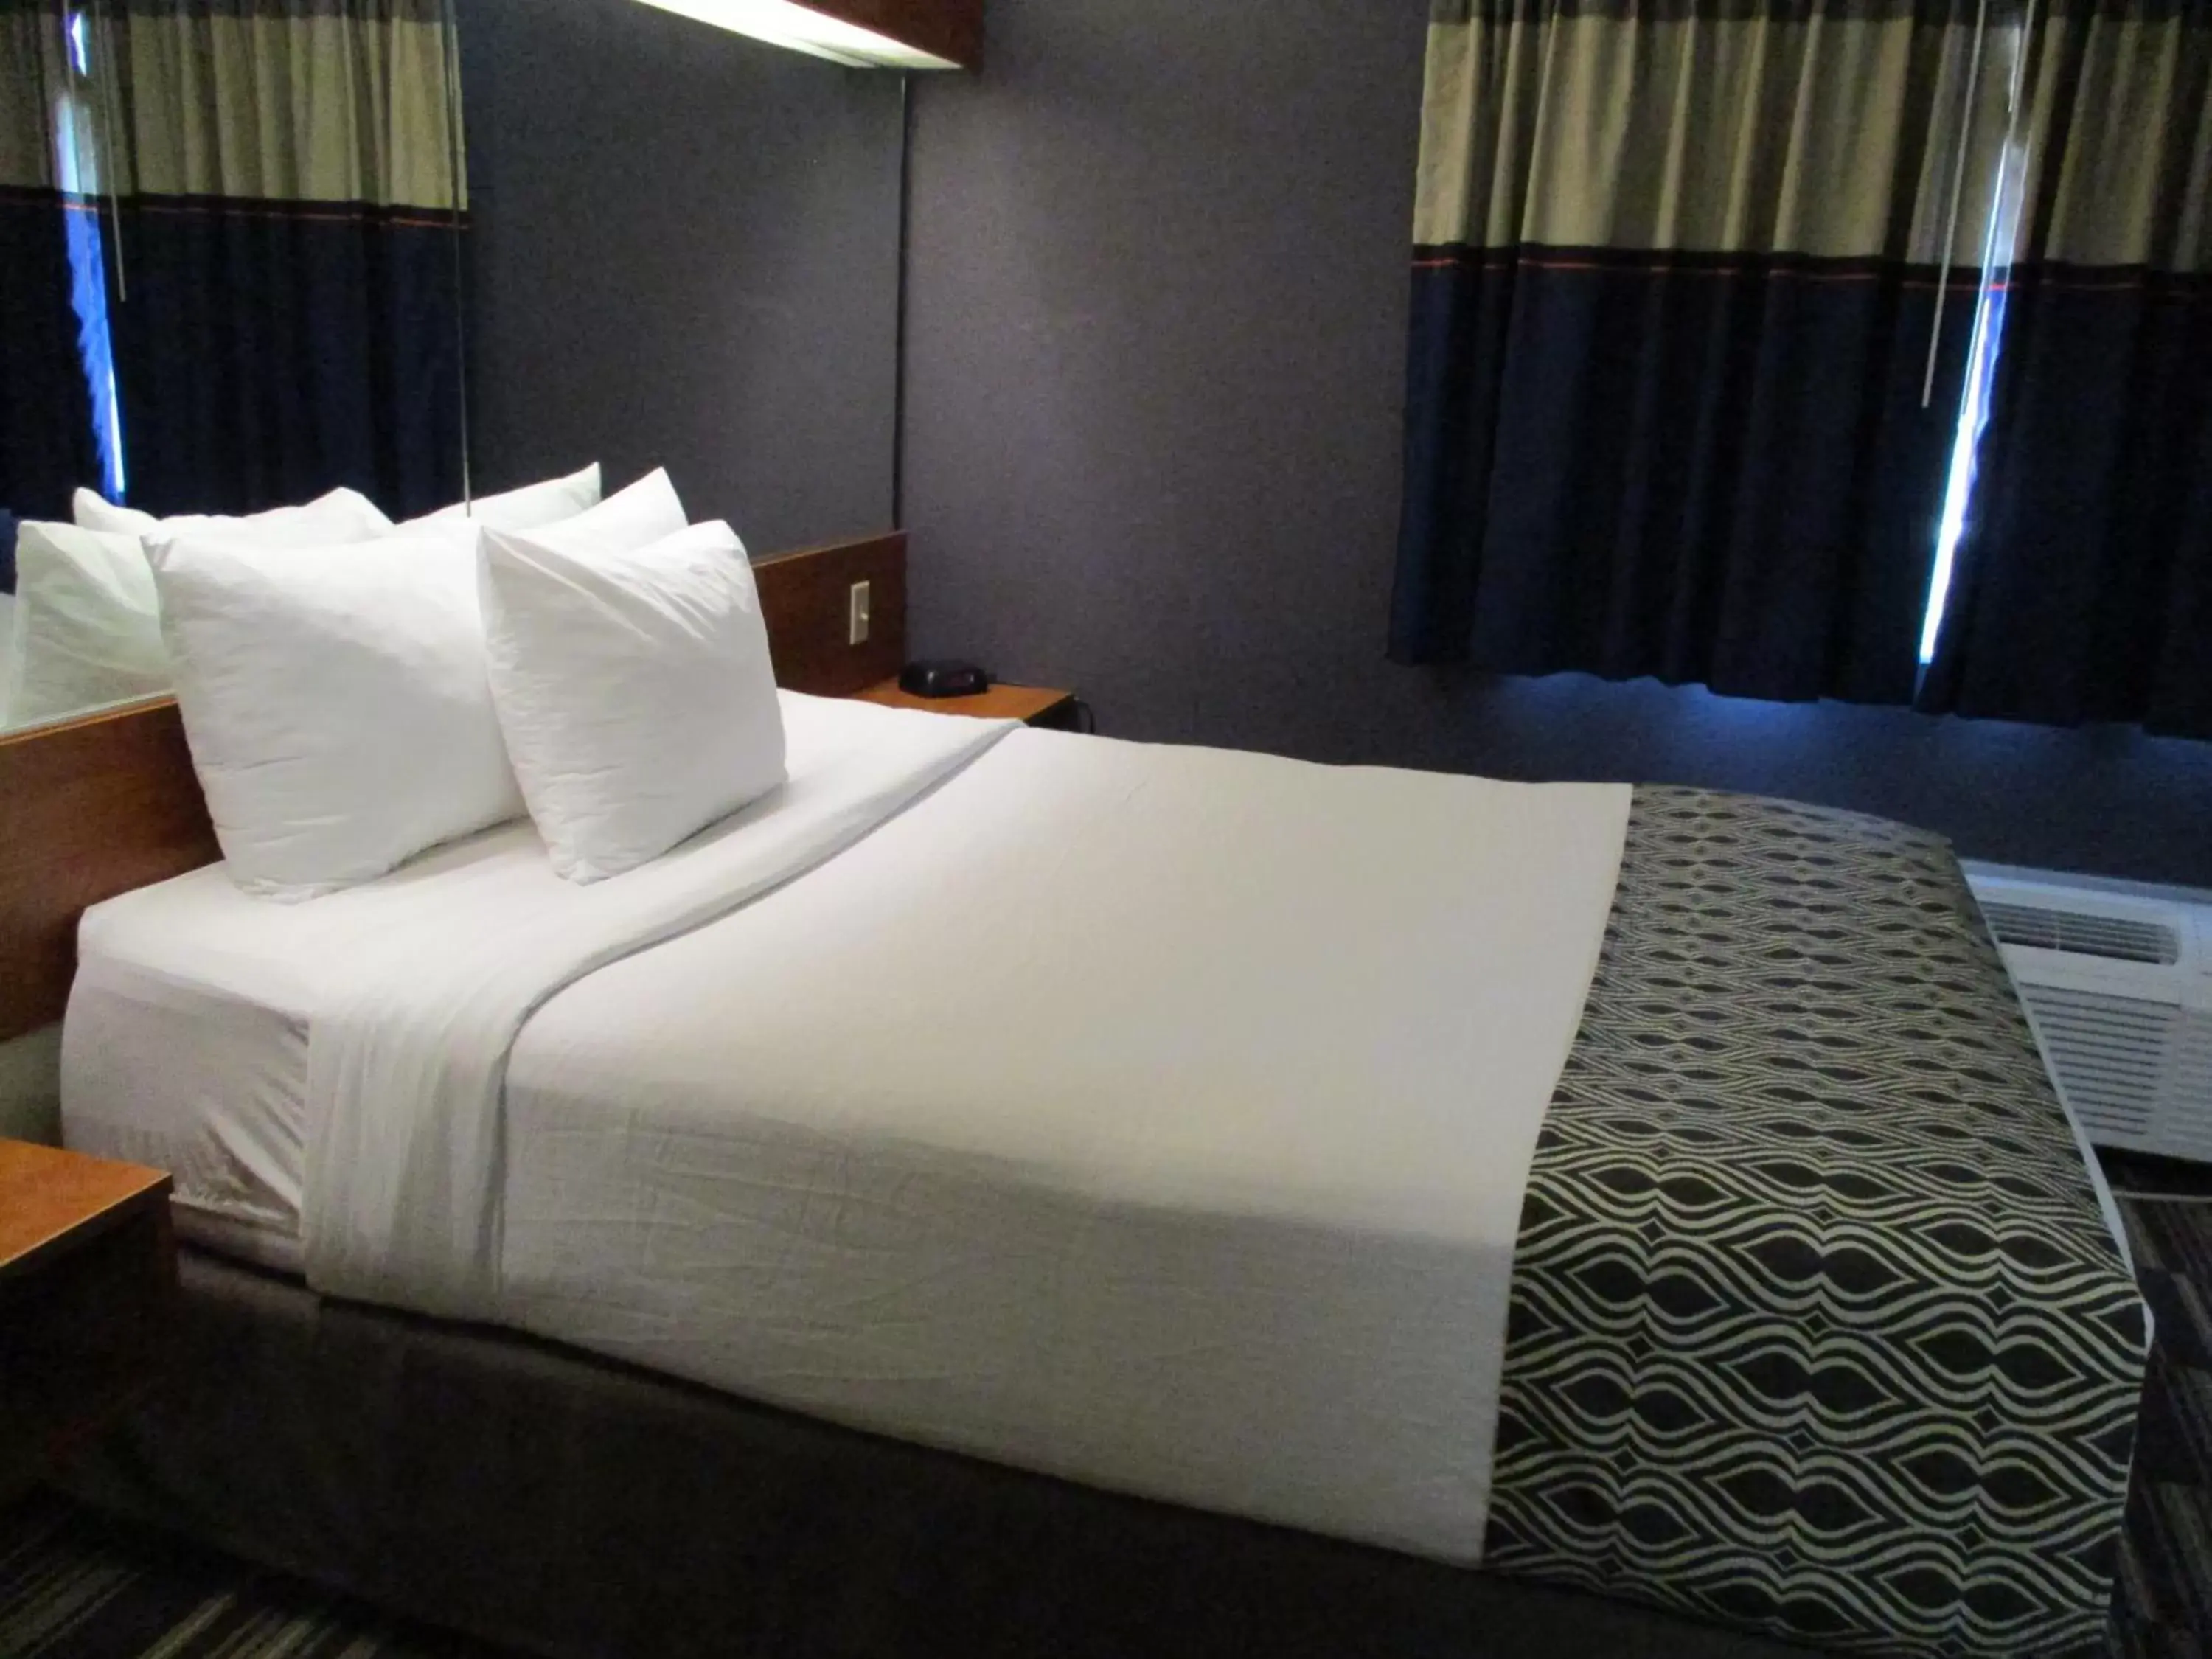 Bed in Microtel Inn and Suites - Inver Grove Heights